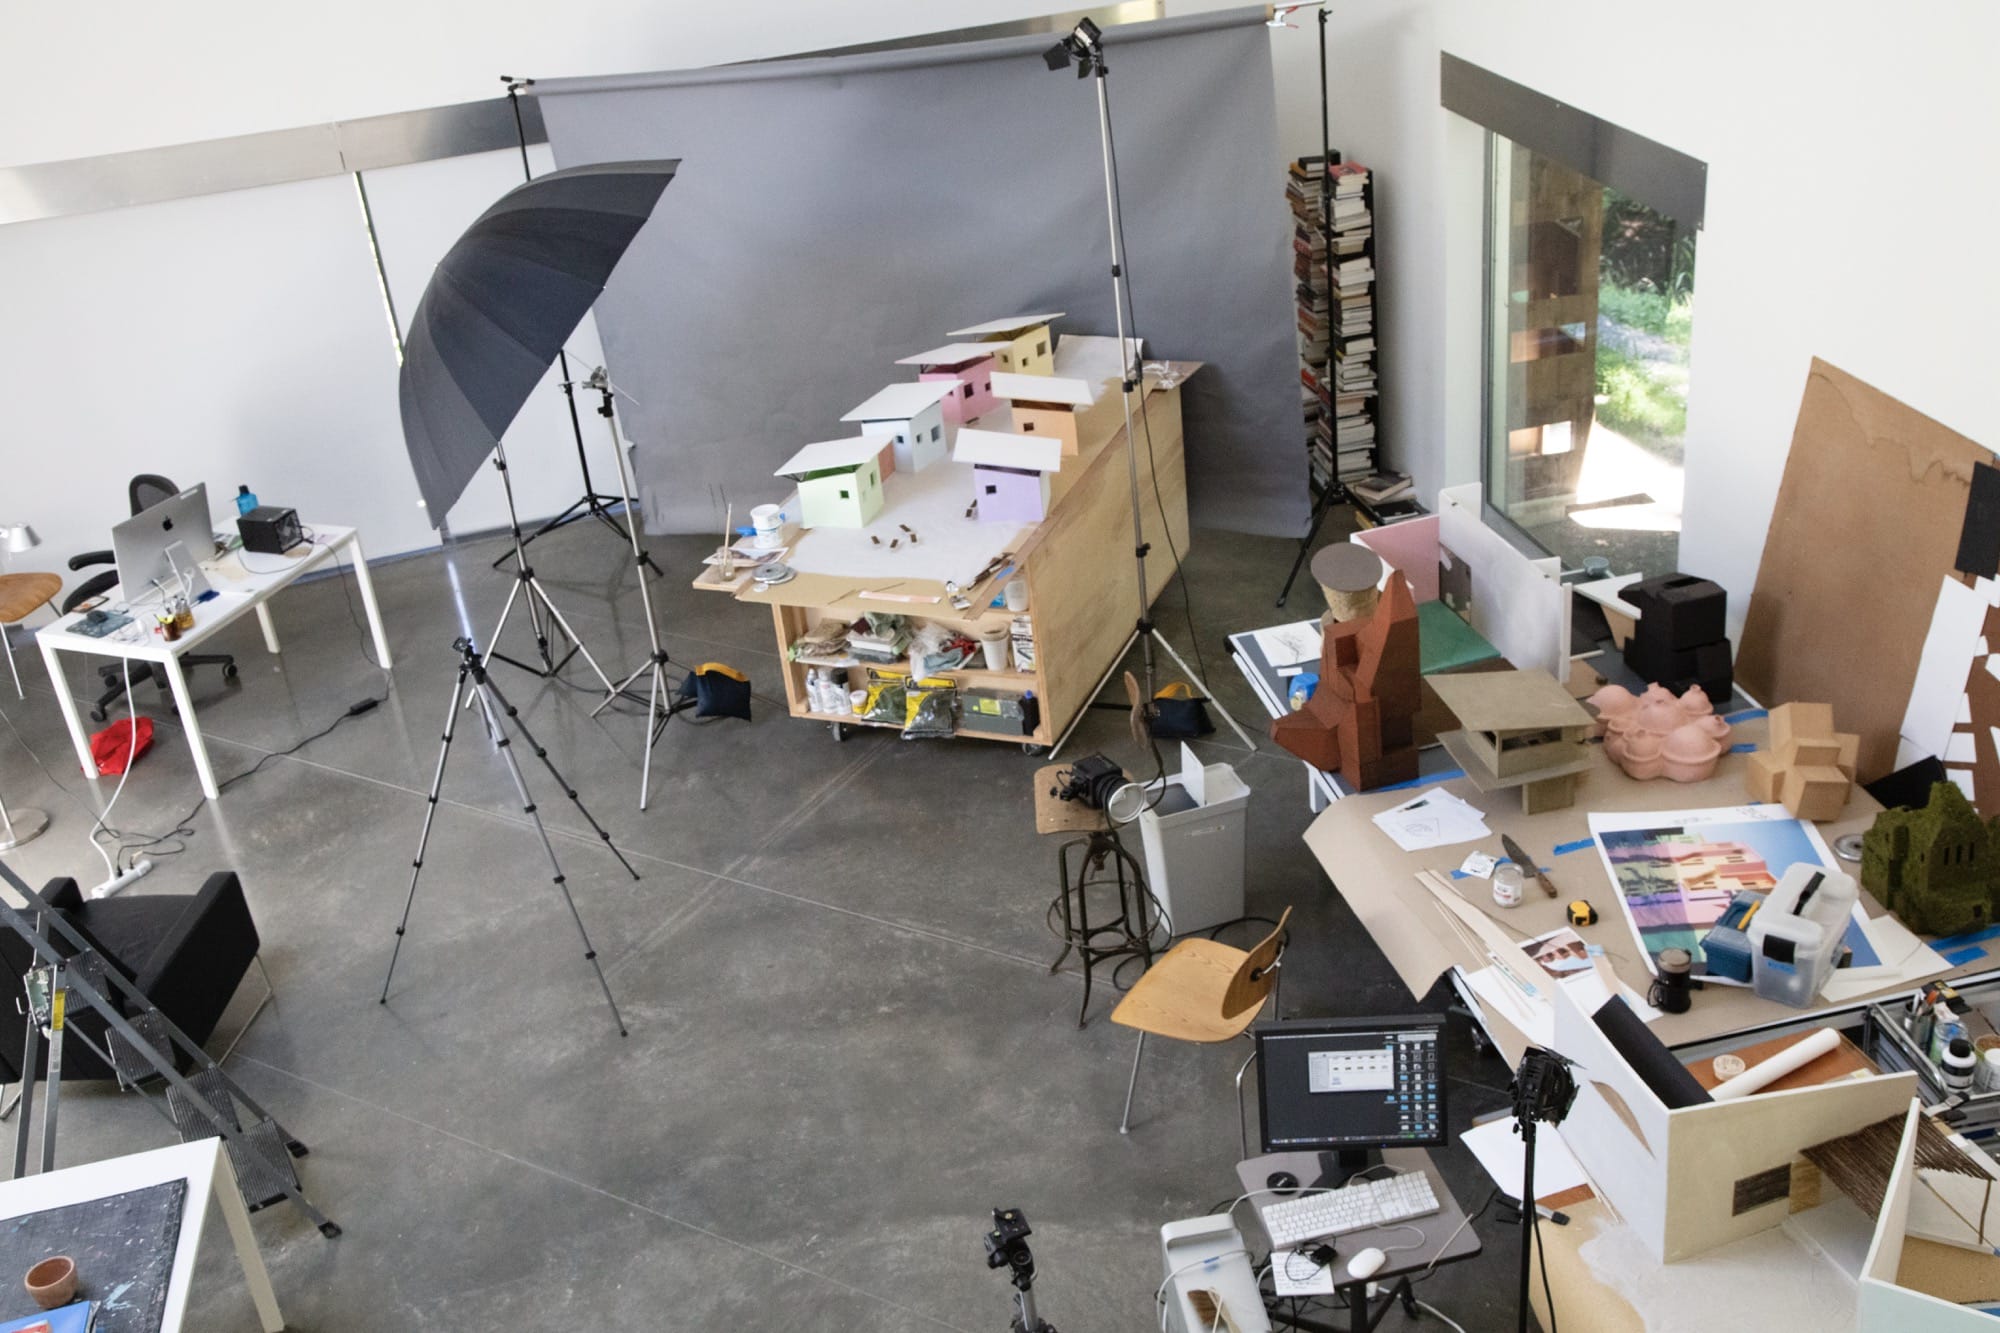 an aerial view of the artist's studio with architectural models on a table and photo equipment